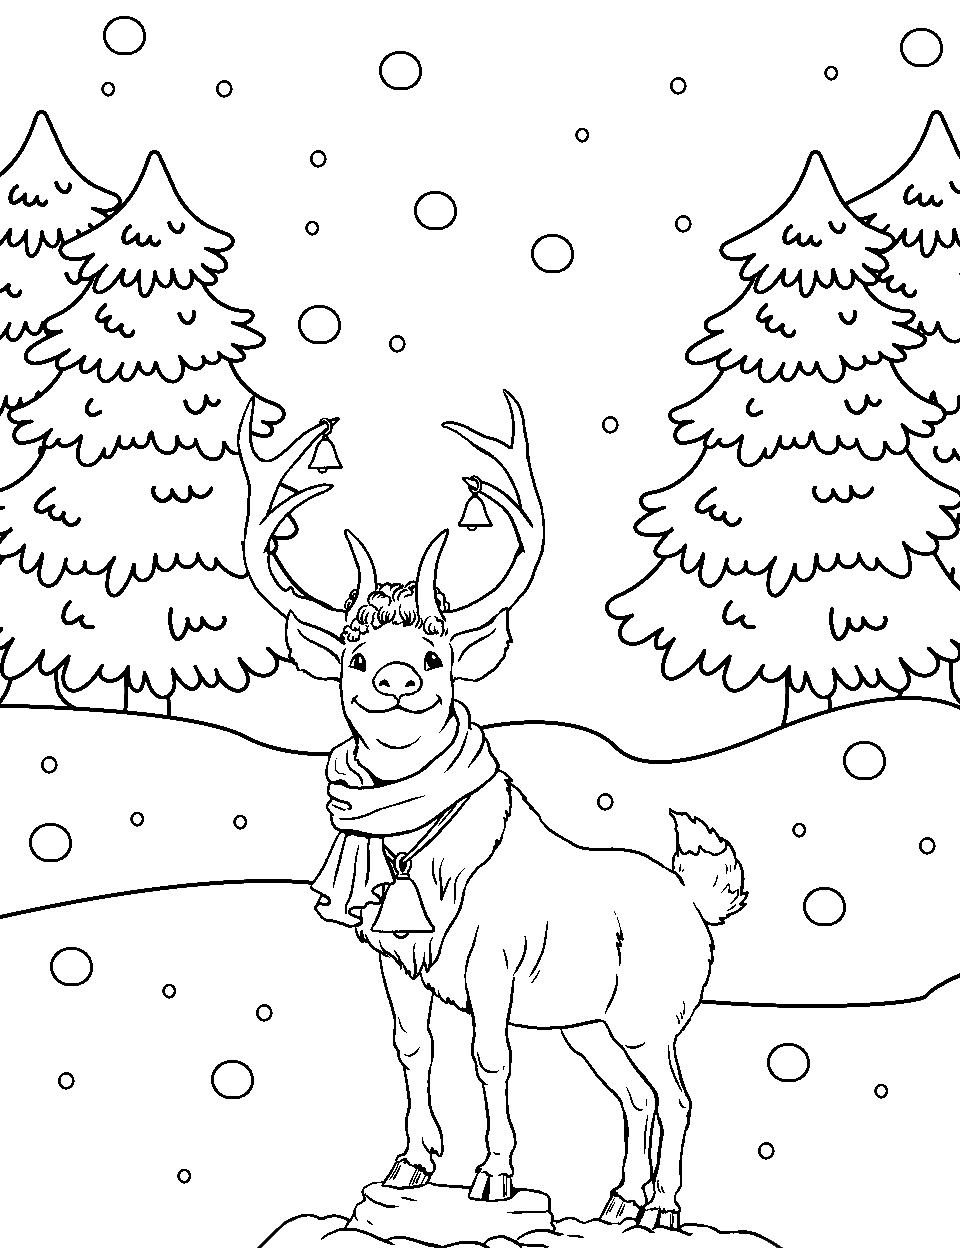 Reindeer in the Snow Coloring Page - A single reindeer standing in a snowy landscape.